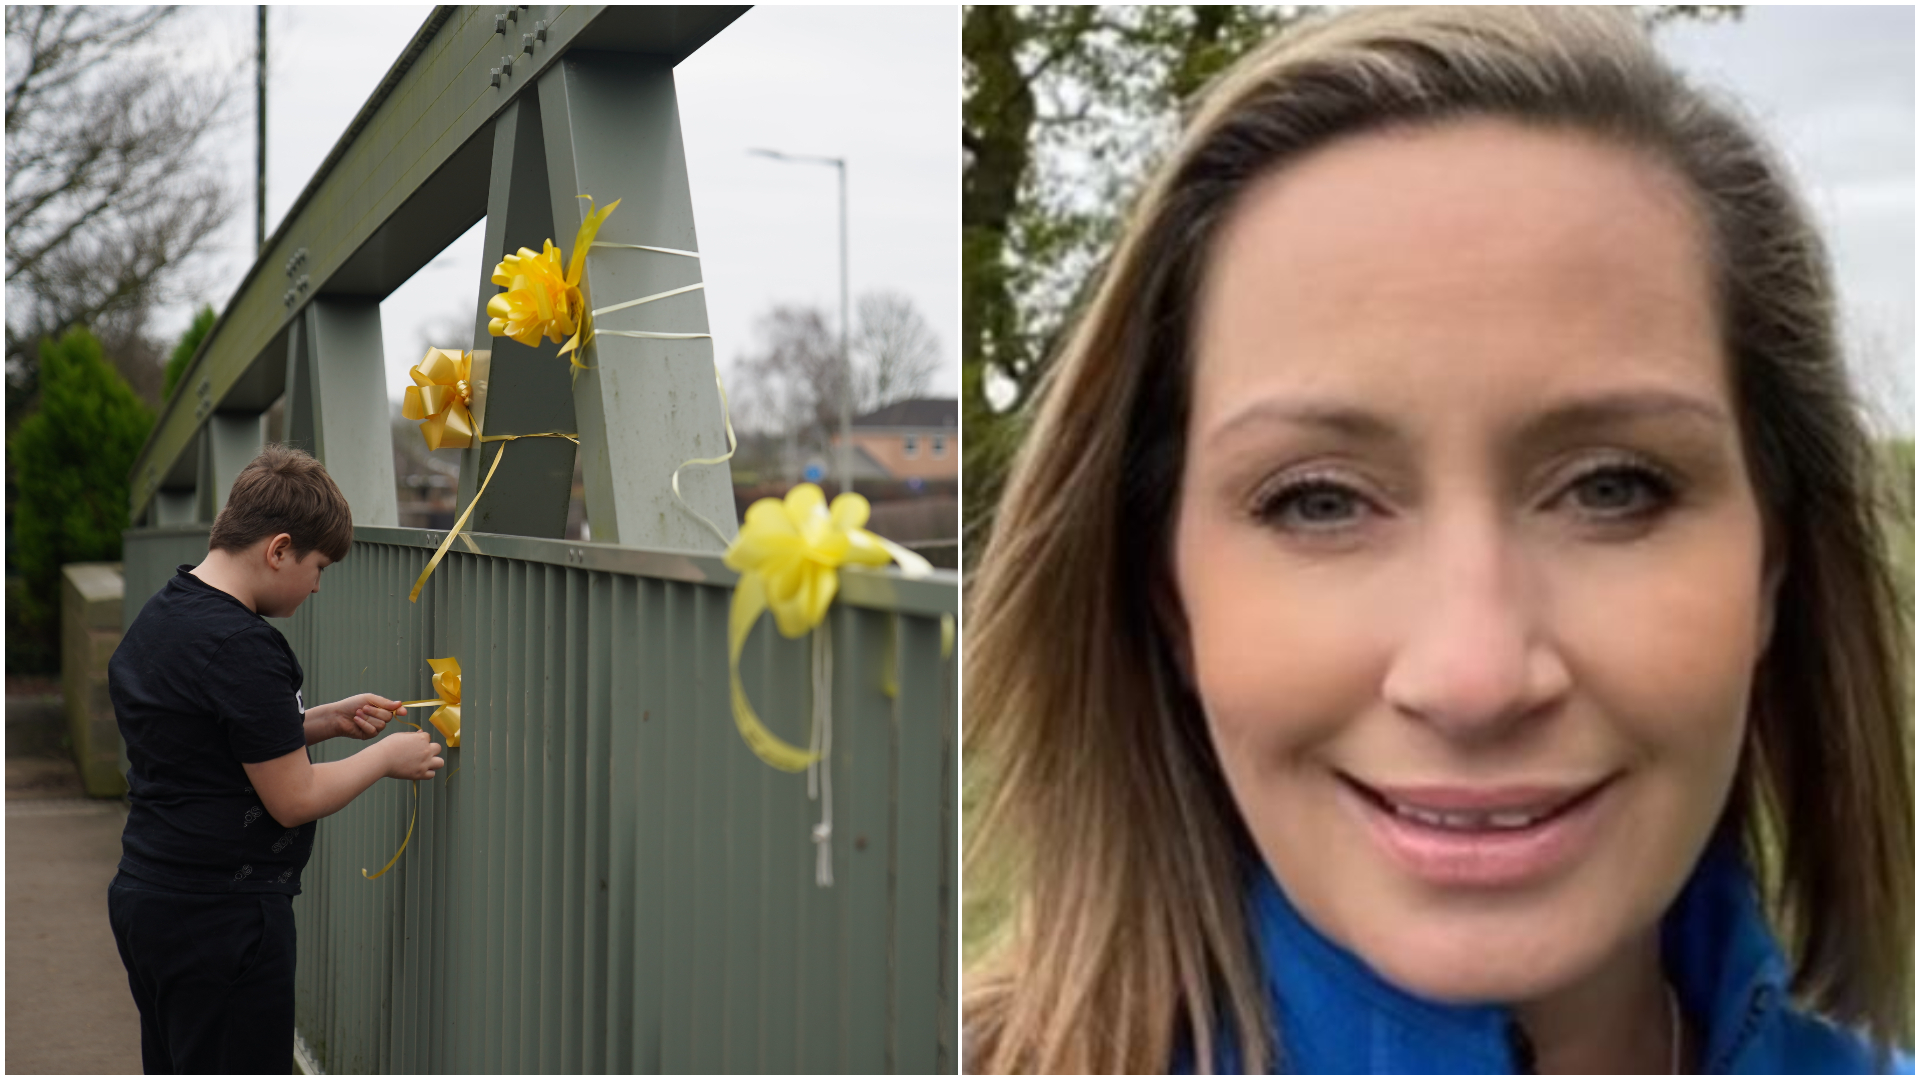 Nicola Bulley: Handwritten messages on yellow ribbons left for